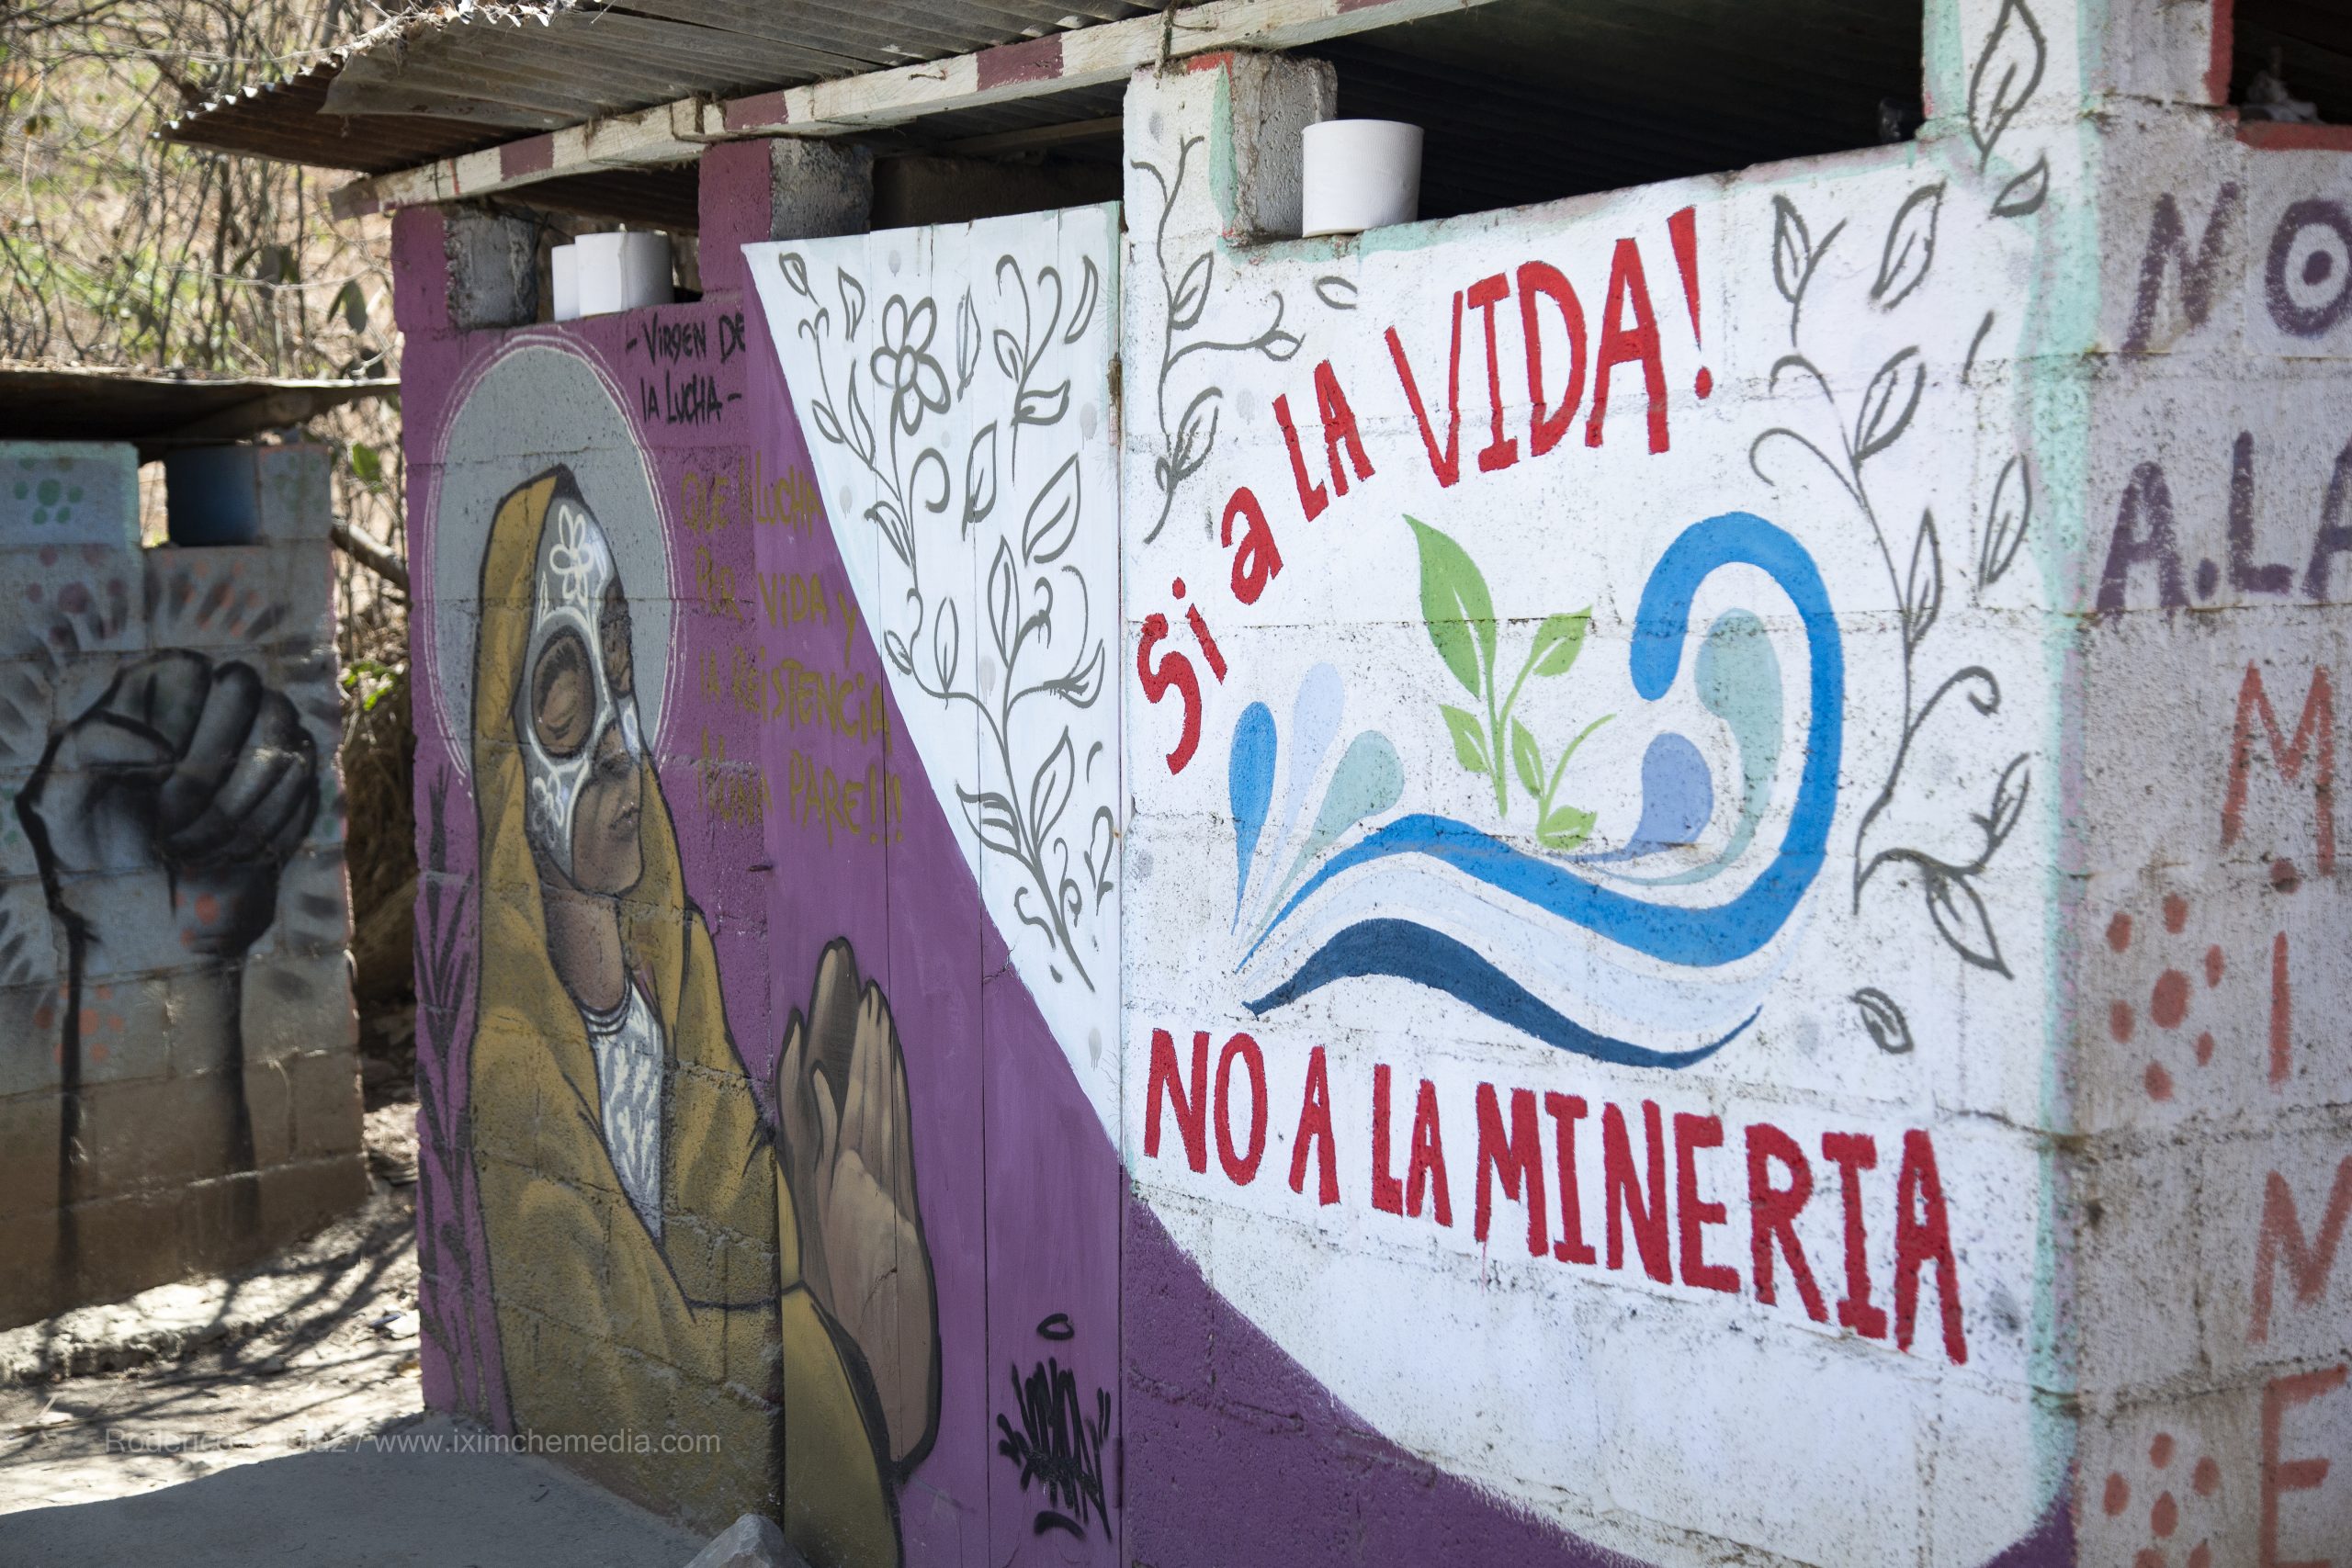 A mural in La Puya, Guatemala reads: "Yes to Life, No to Mining." (Photo: Iximche Media)